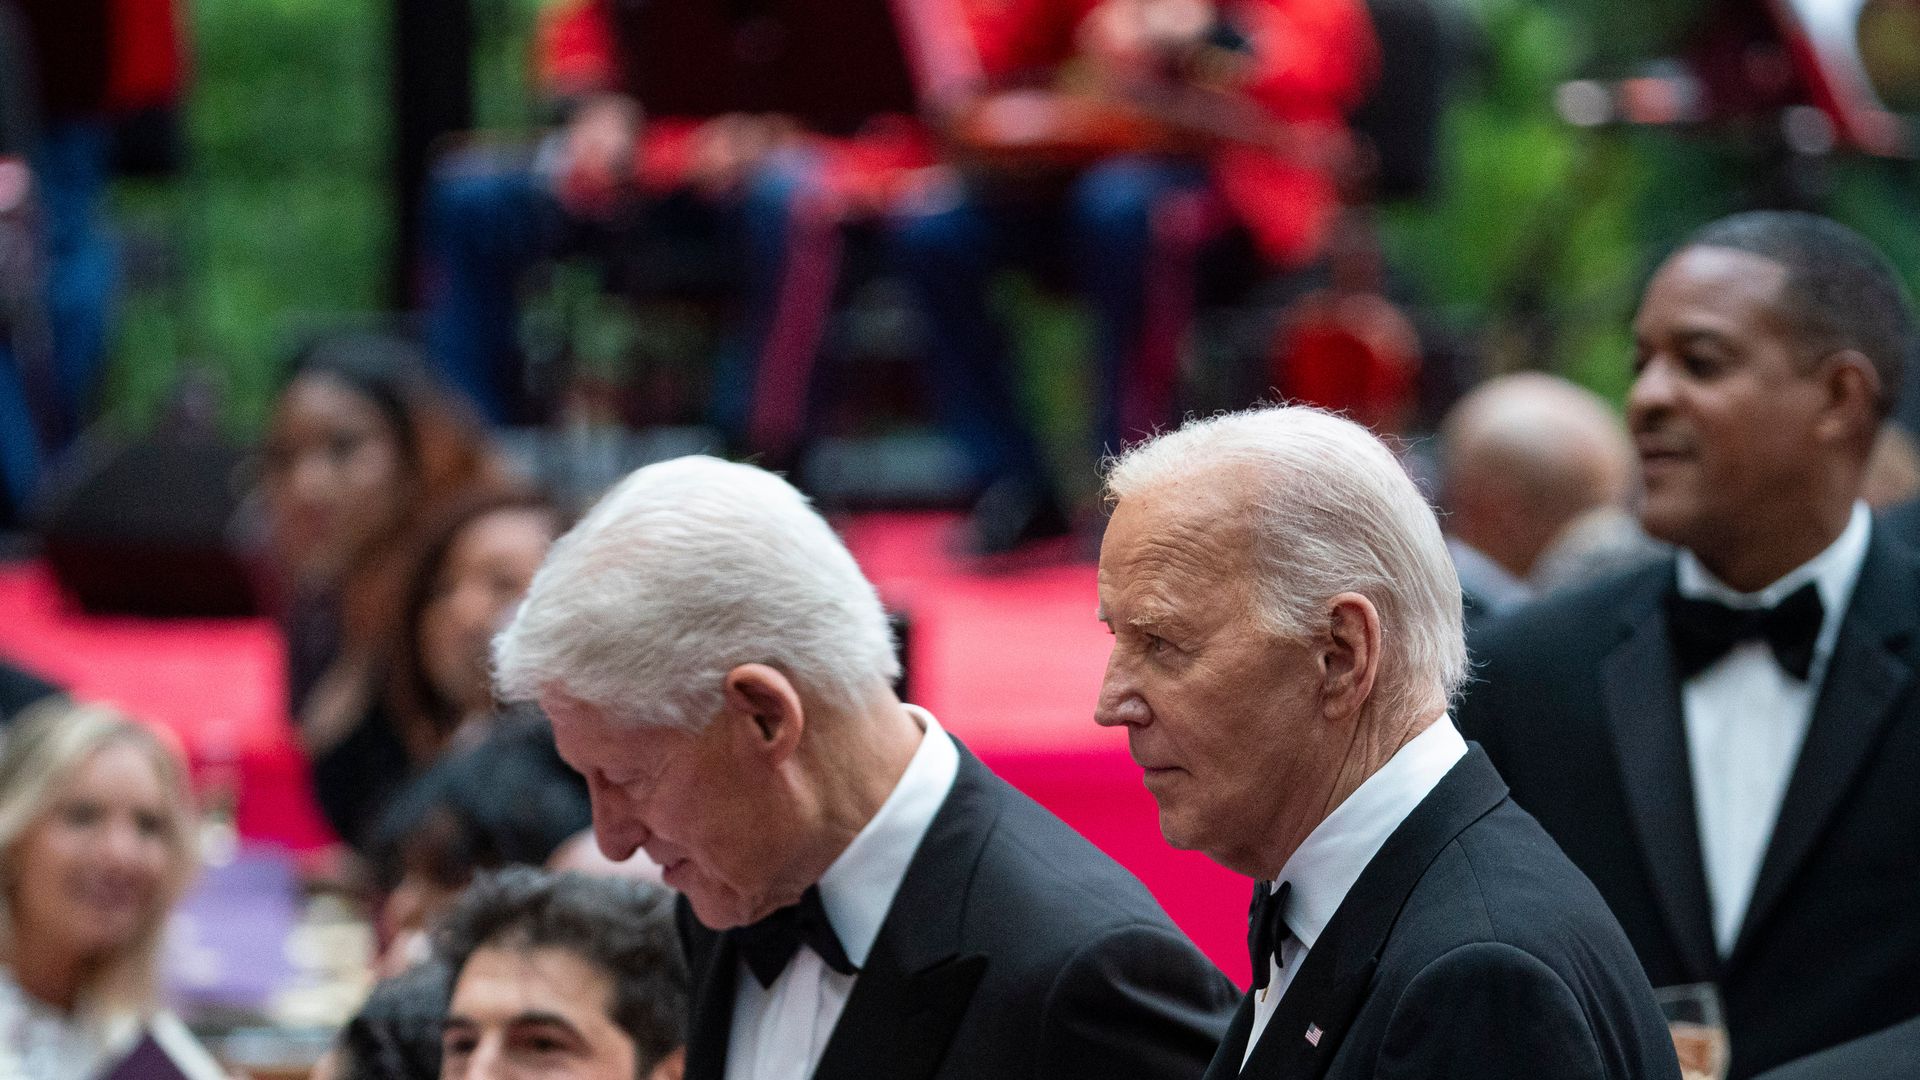 Bill Clinton and Joe Biden stand together at the Kenyan state dinner at the White House